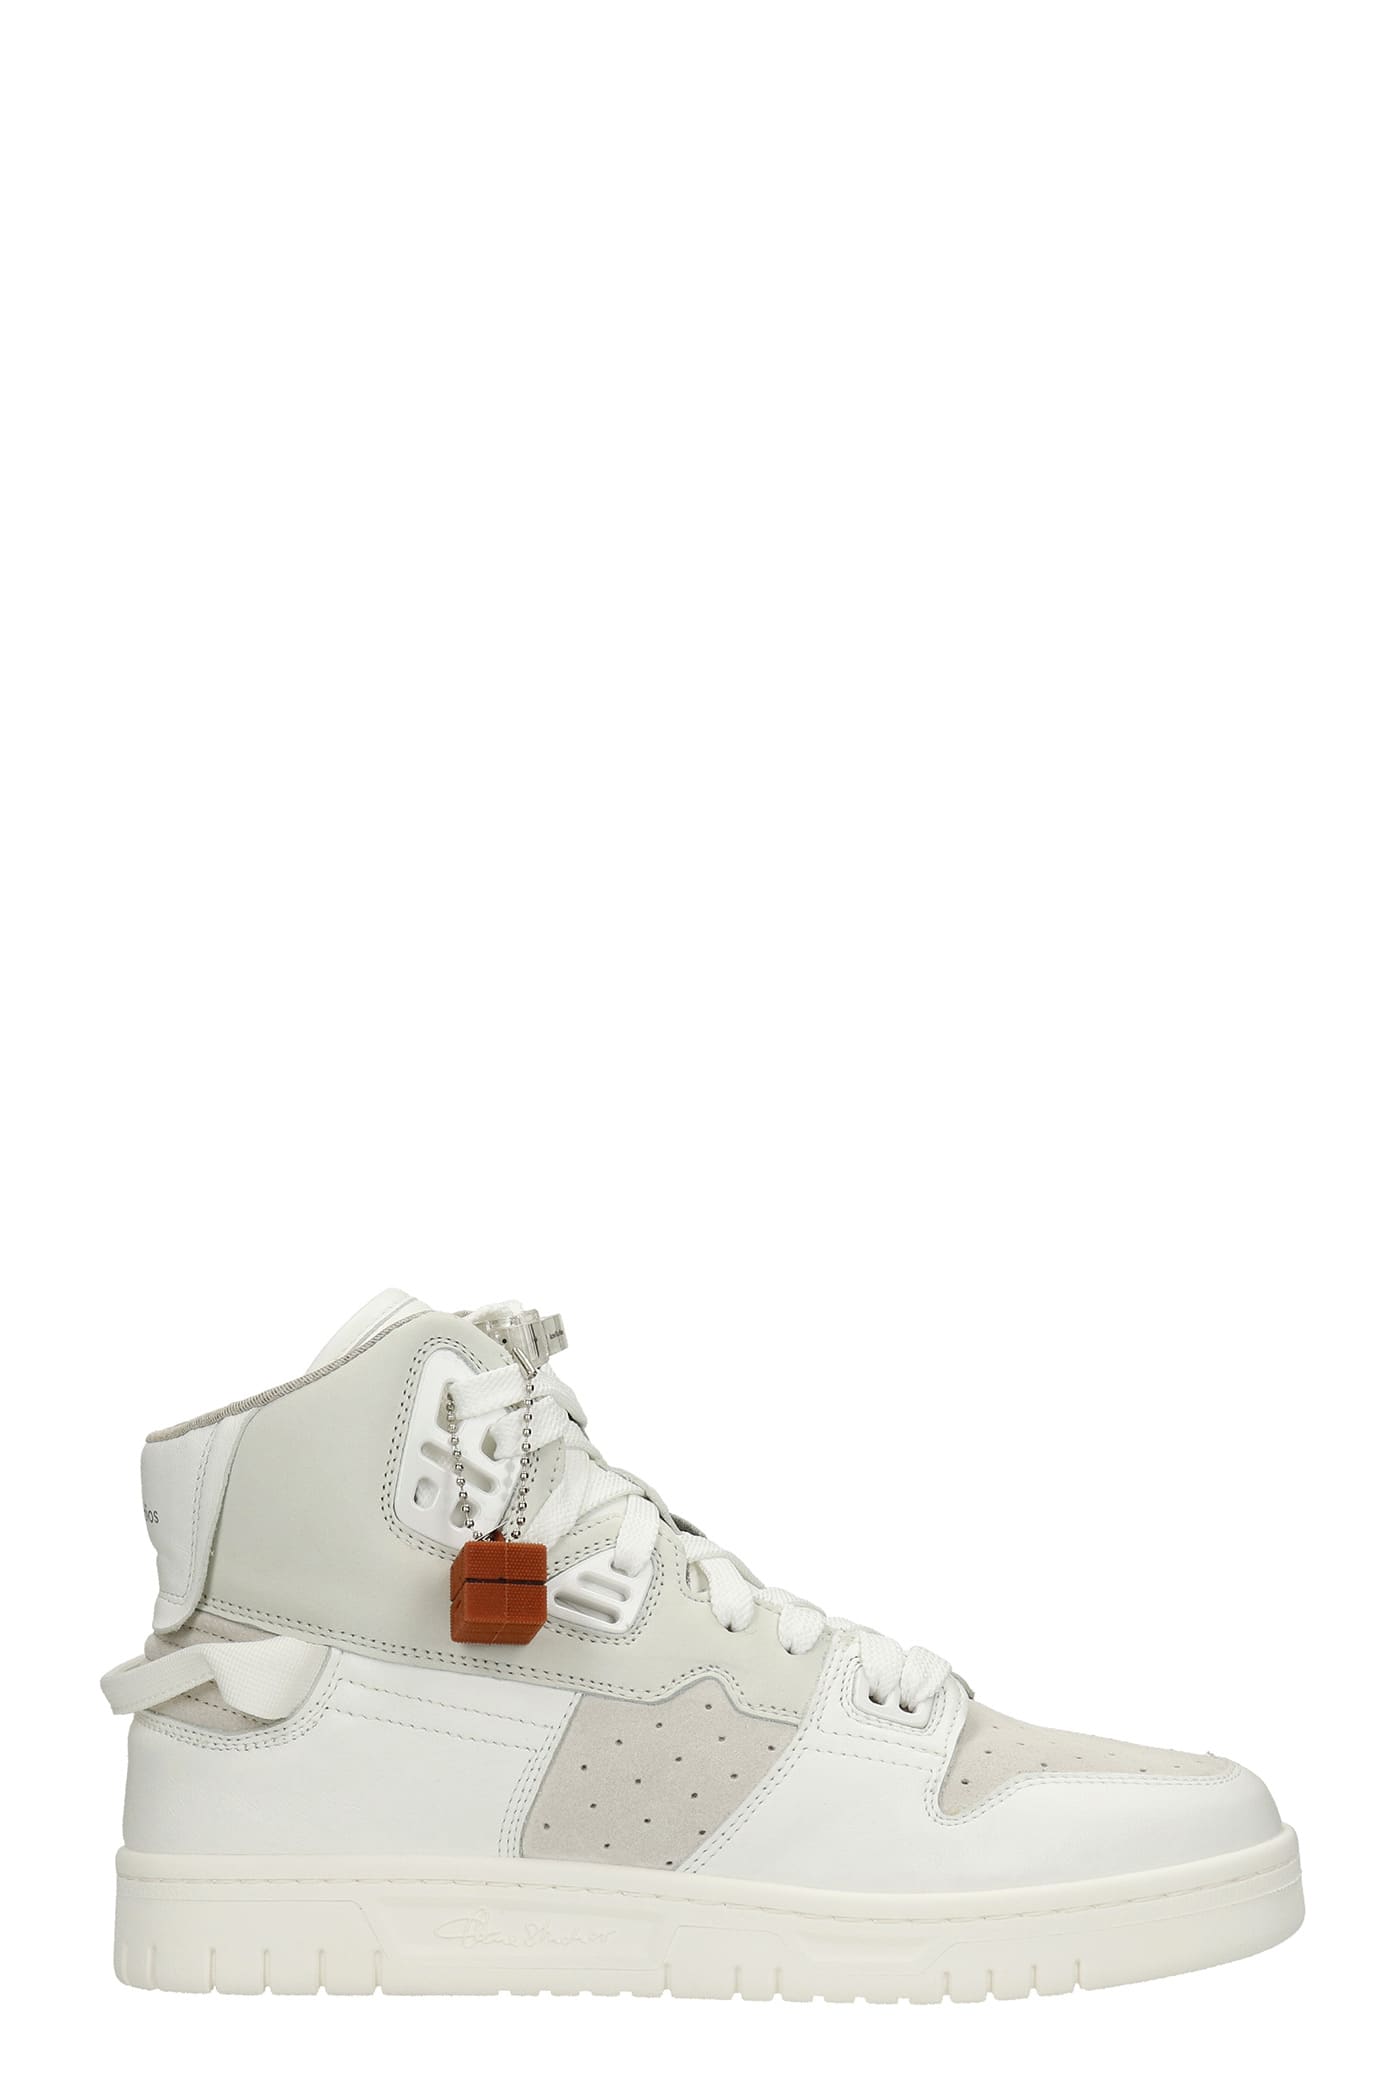 ACNE STUDIOS ACNE STUDIOS STHMC HIGH MIX SNEAKERS IN WHITE SUEDE AND LEATHER,BD017053K